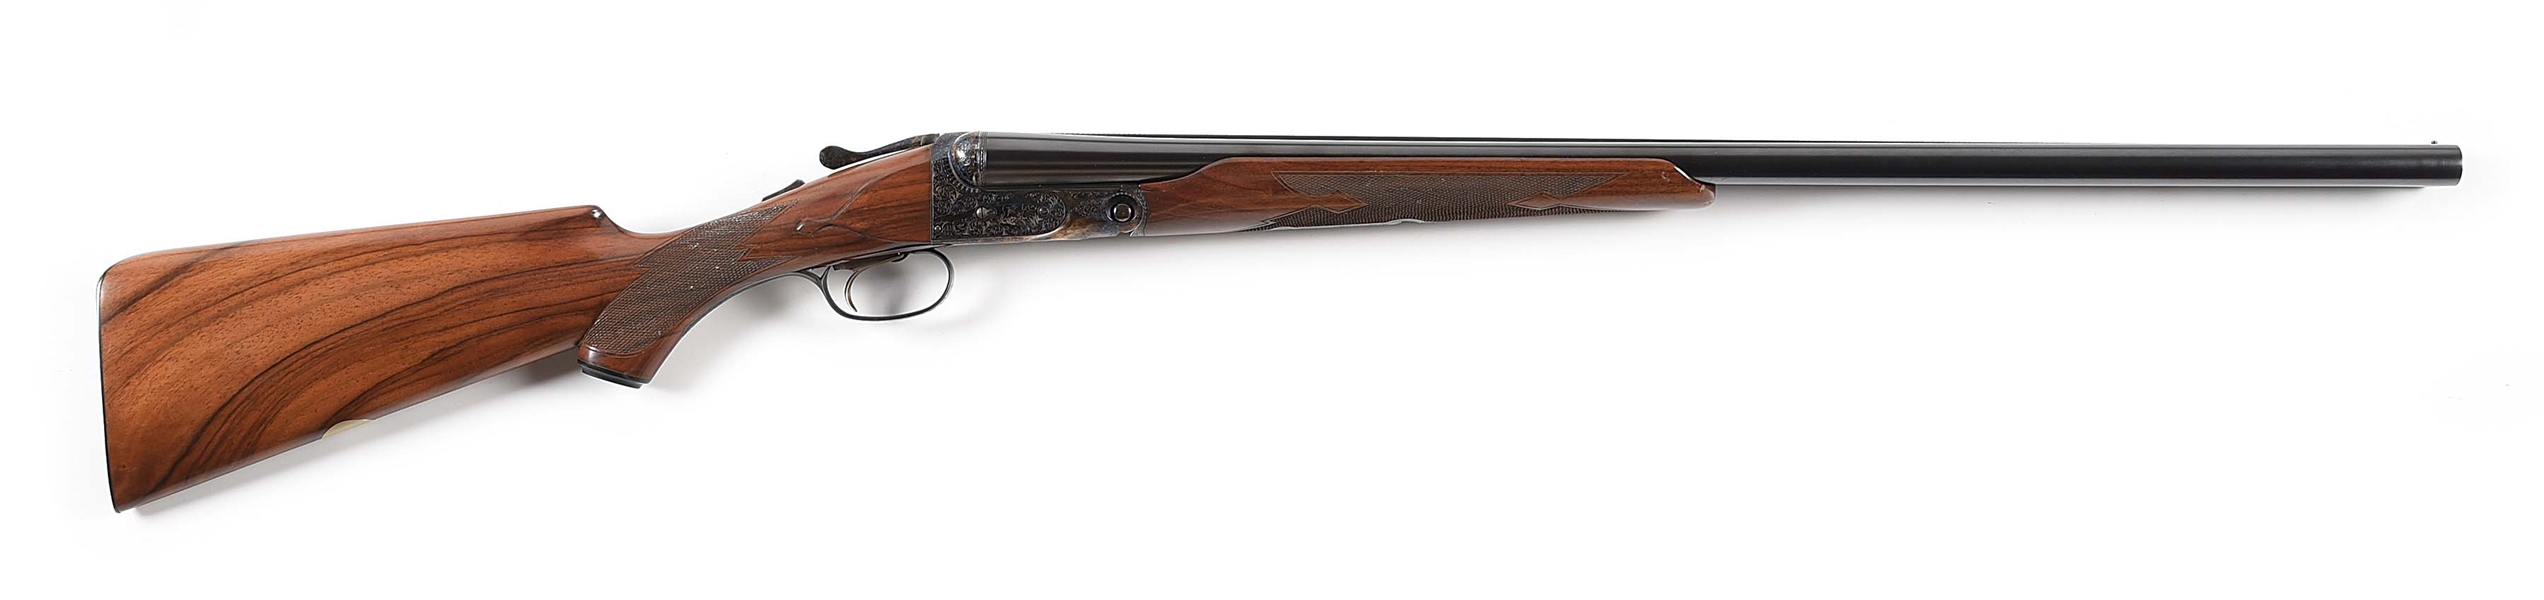 (M) WINCHESTER PARKER REPRODUCTION SIDE BY SIDE SHOTGUN.